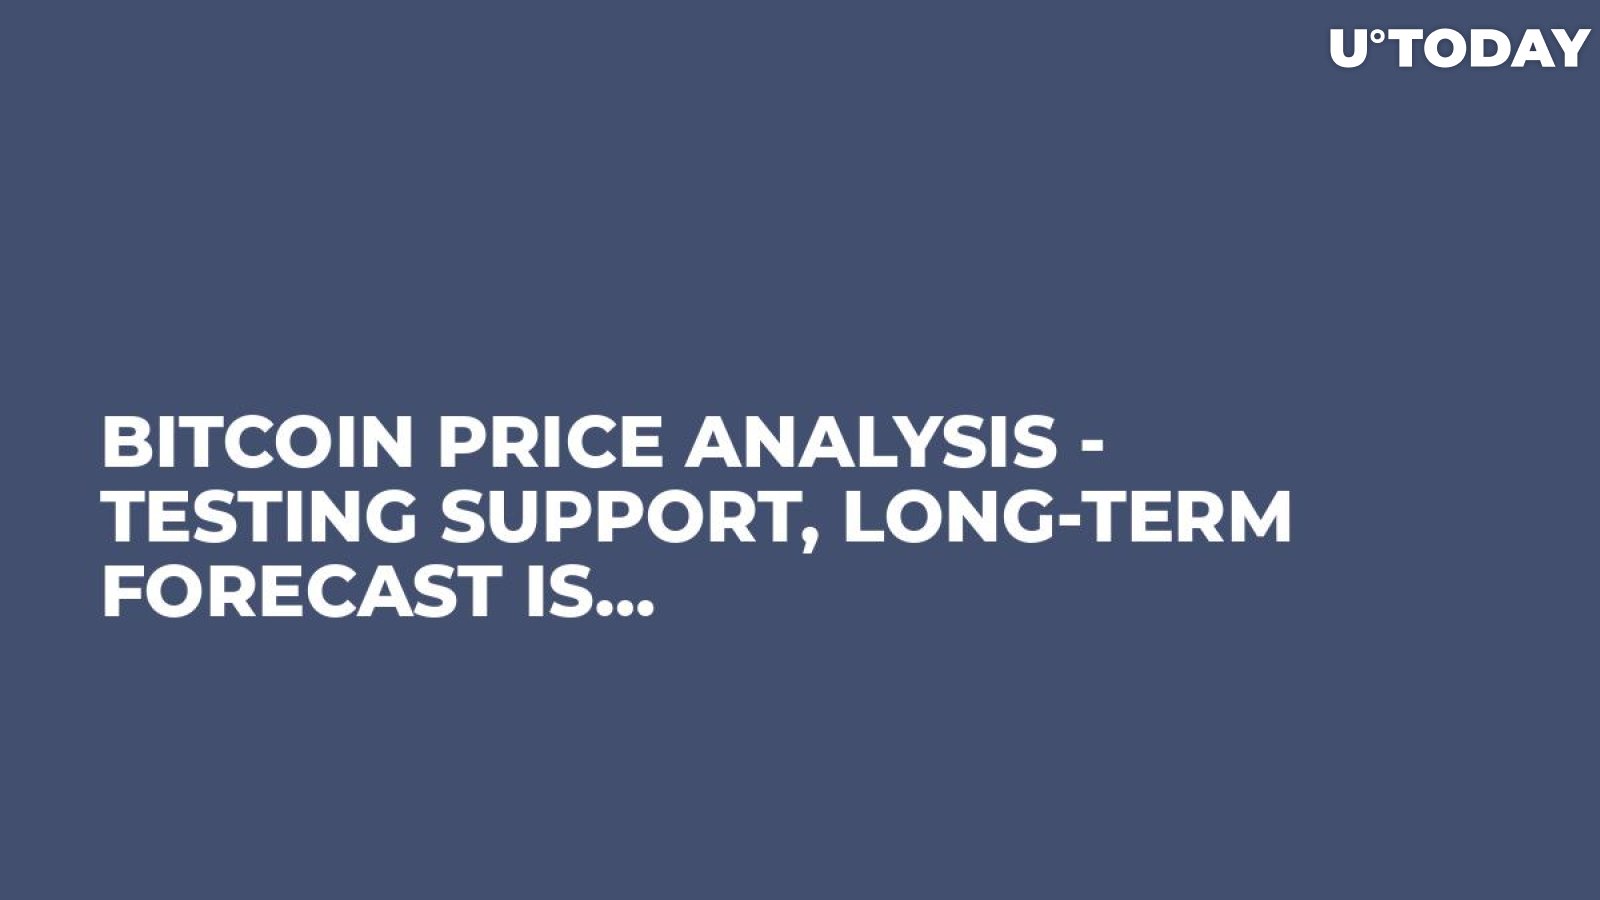 Bitcoin Price Analysis - Testing Support, Long-Term Forecast Is…